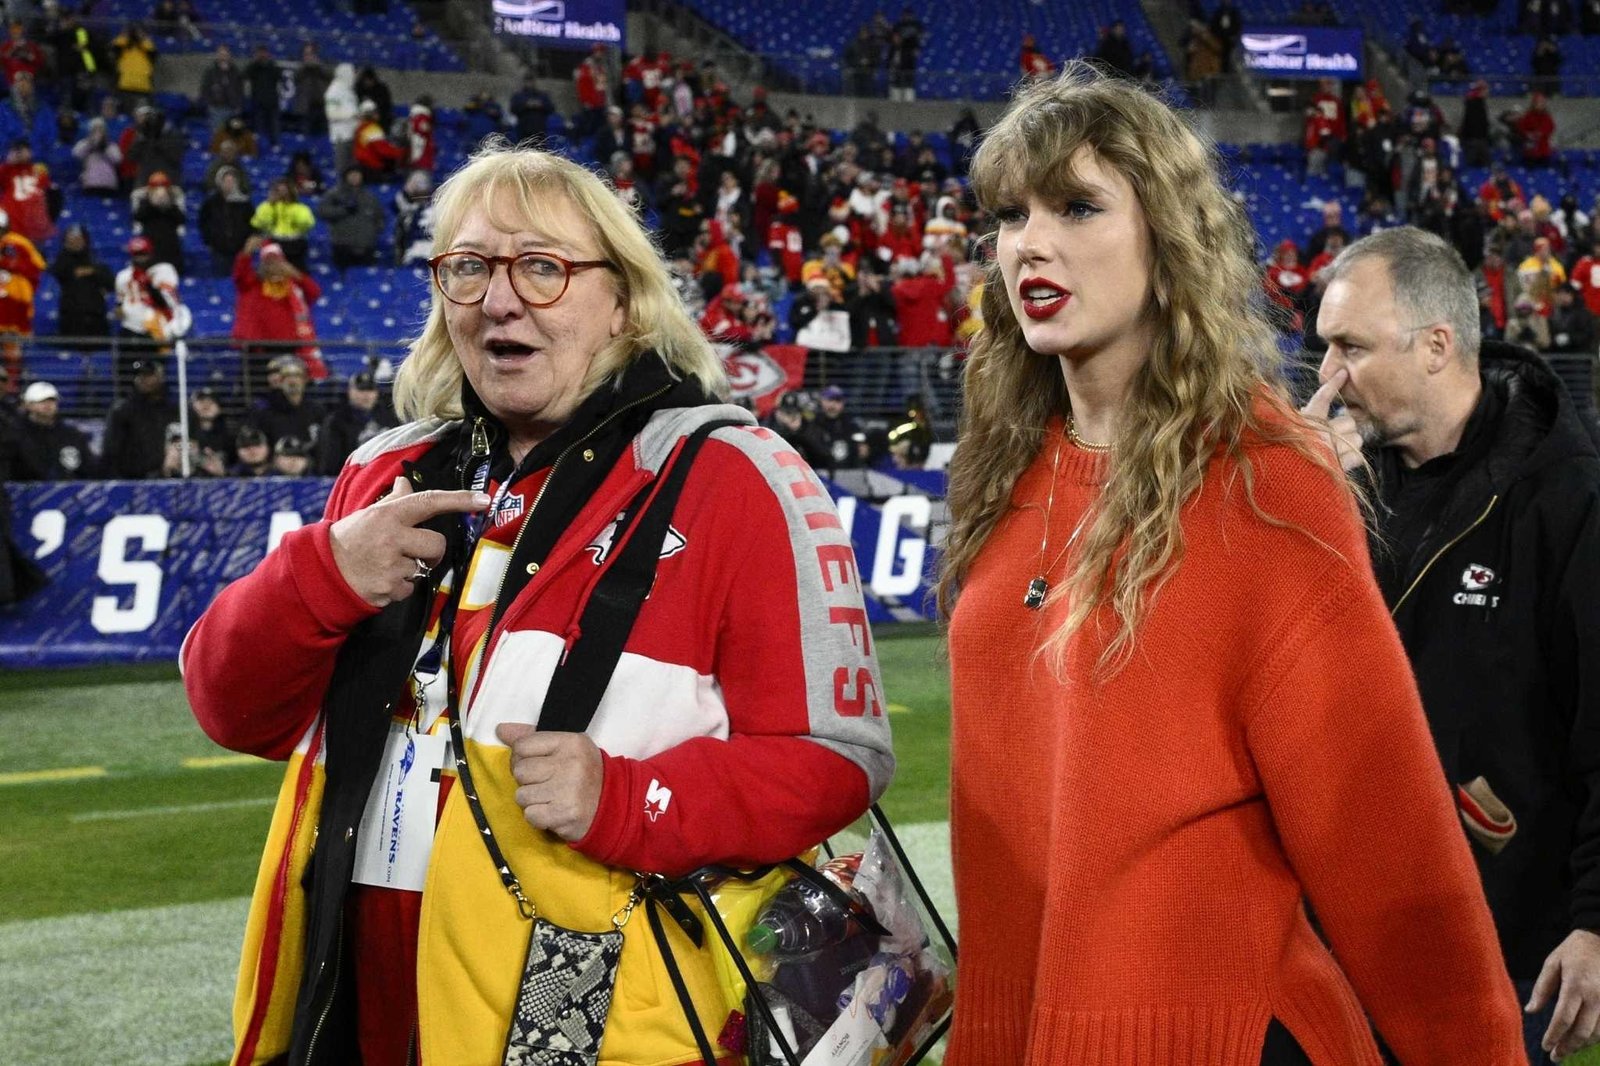 Taylor Swift act as Bodyguard for Donna Kelce after chiefs win on Sunday "Don't touch her please"